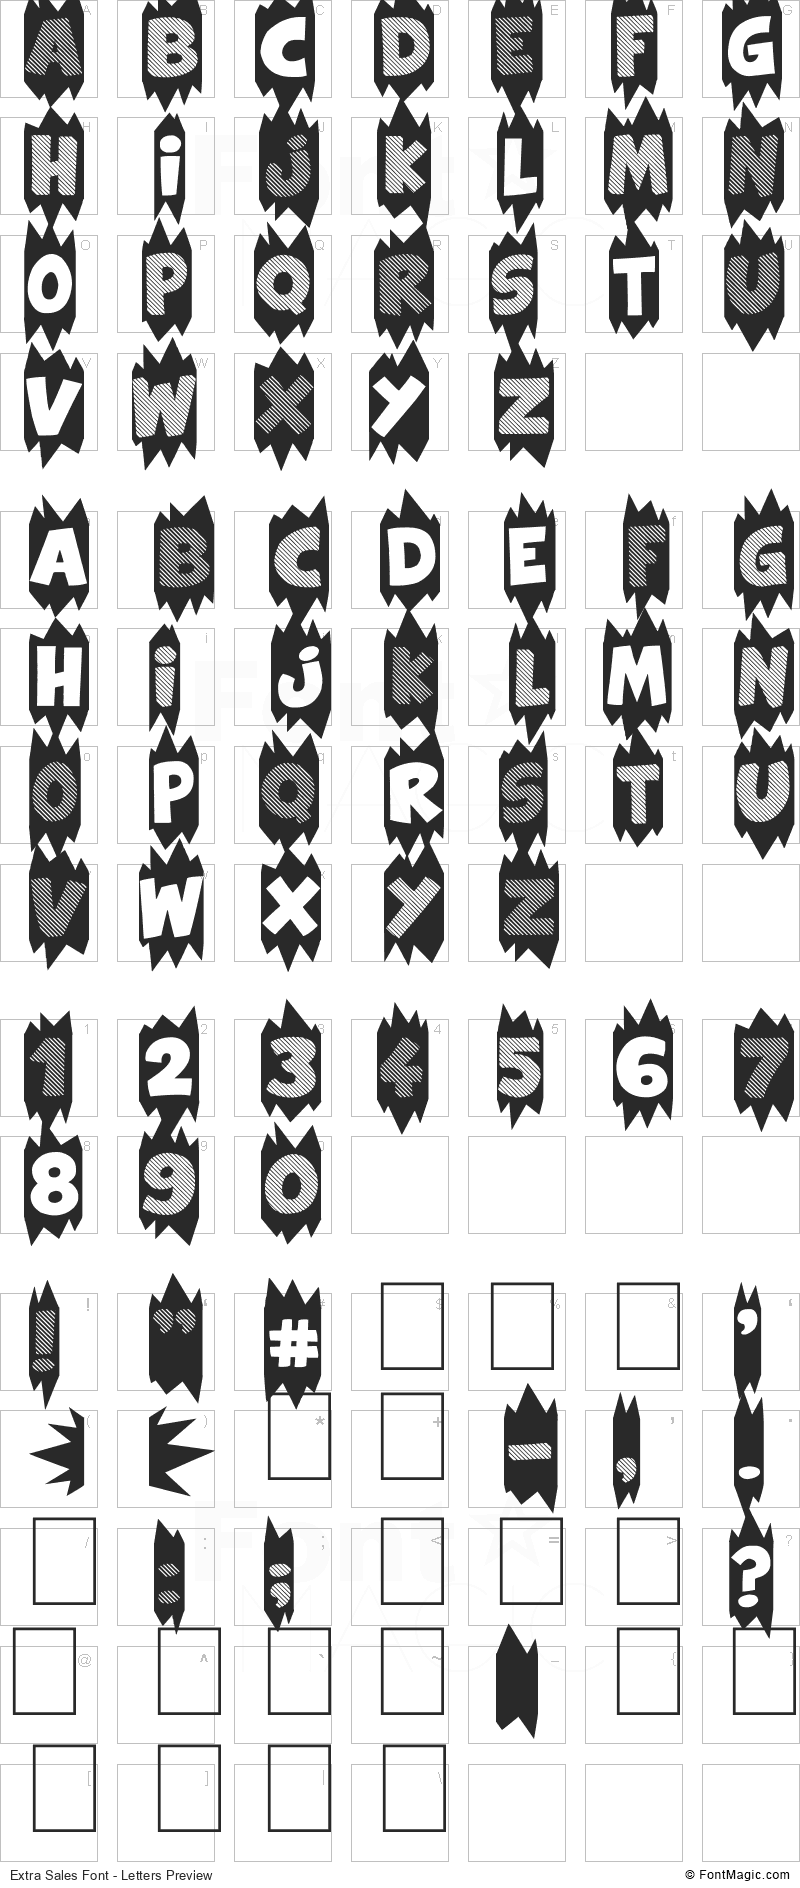 Extra Sales Font - All Latters Preview Chart